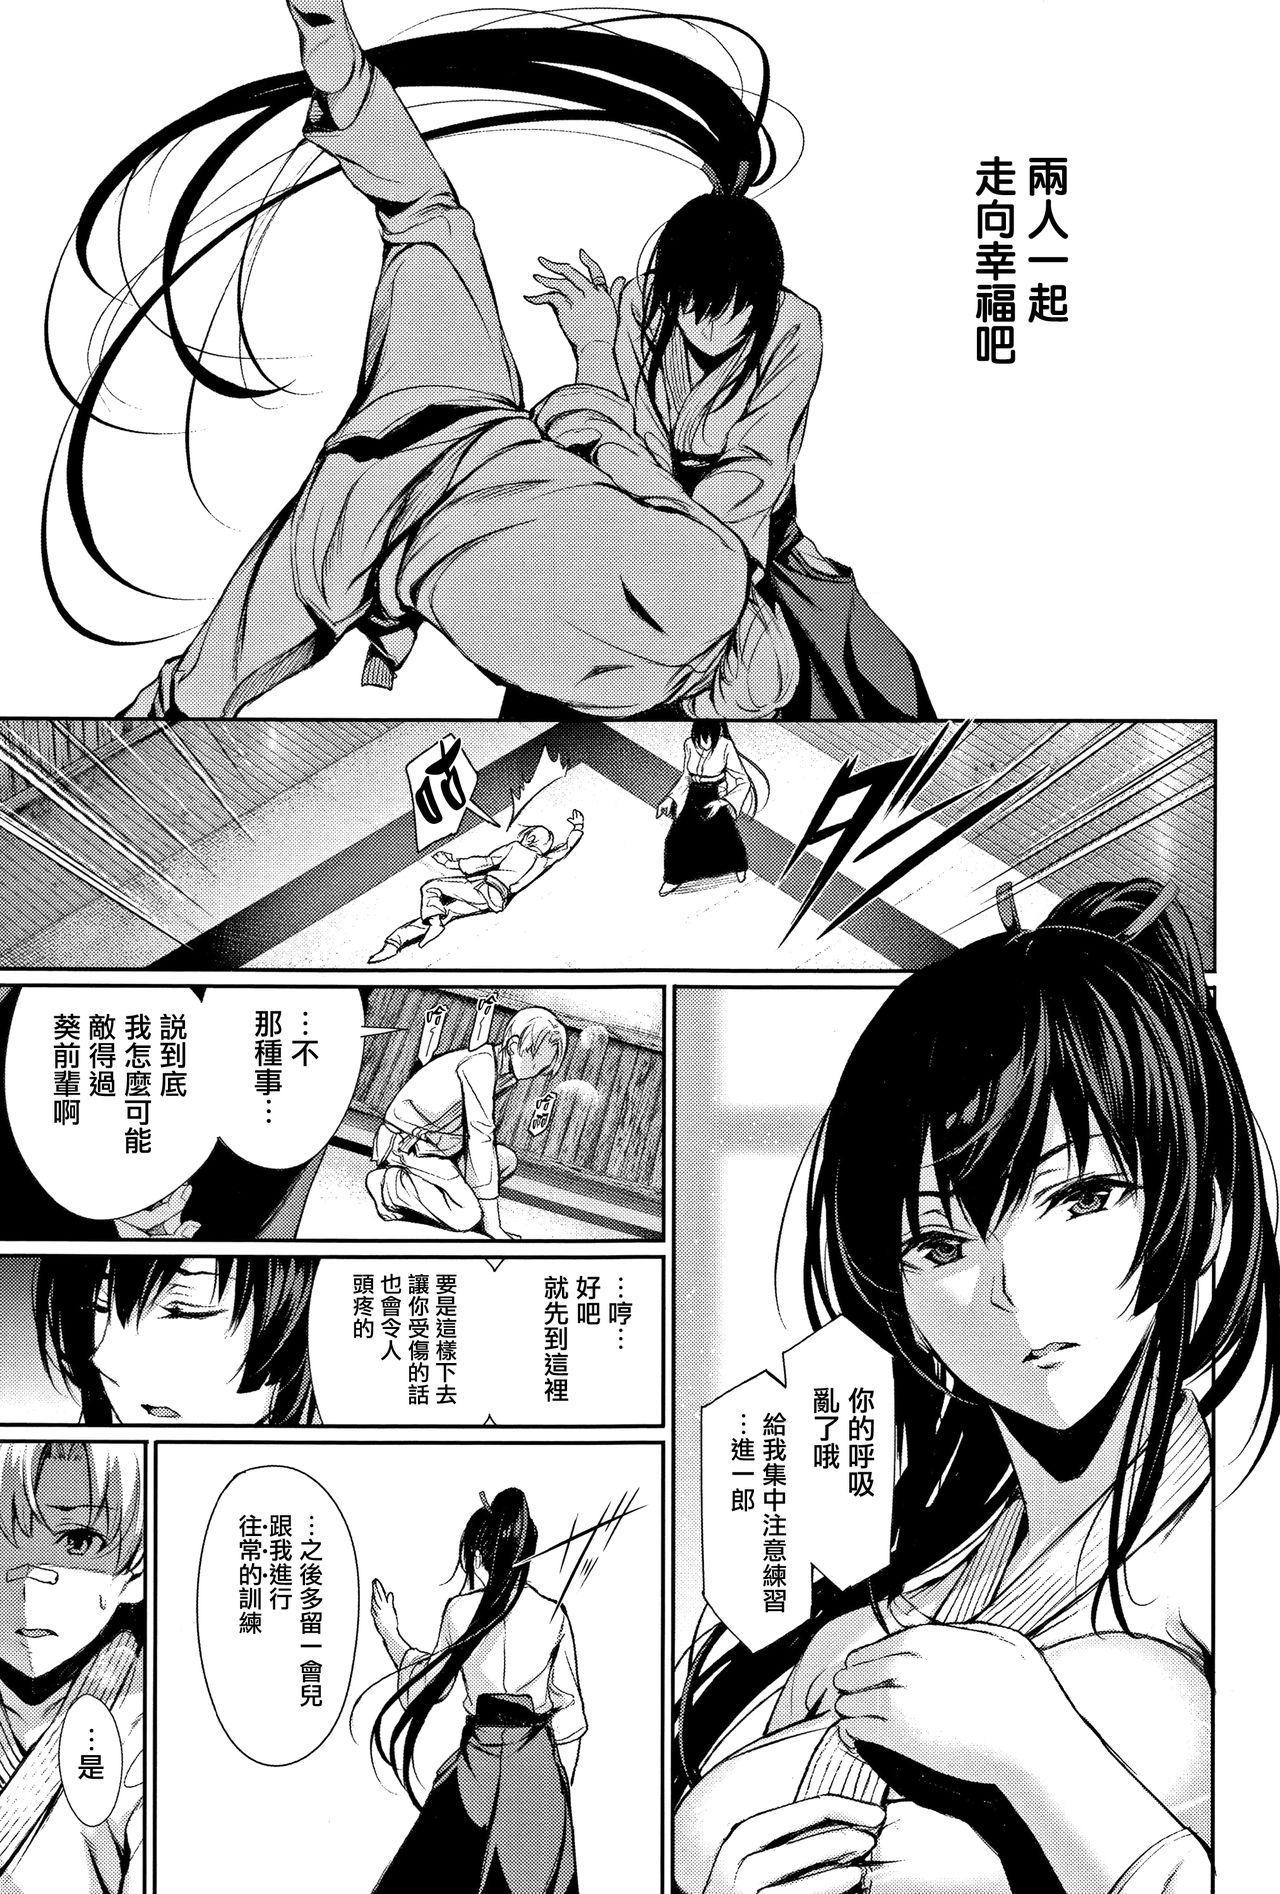 Sissy Kimi Omou Koi - I think of you. Ch. 1 Time - Page 8